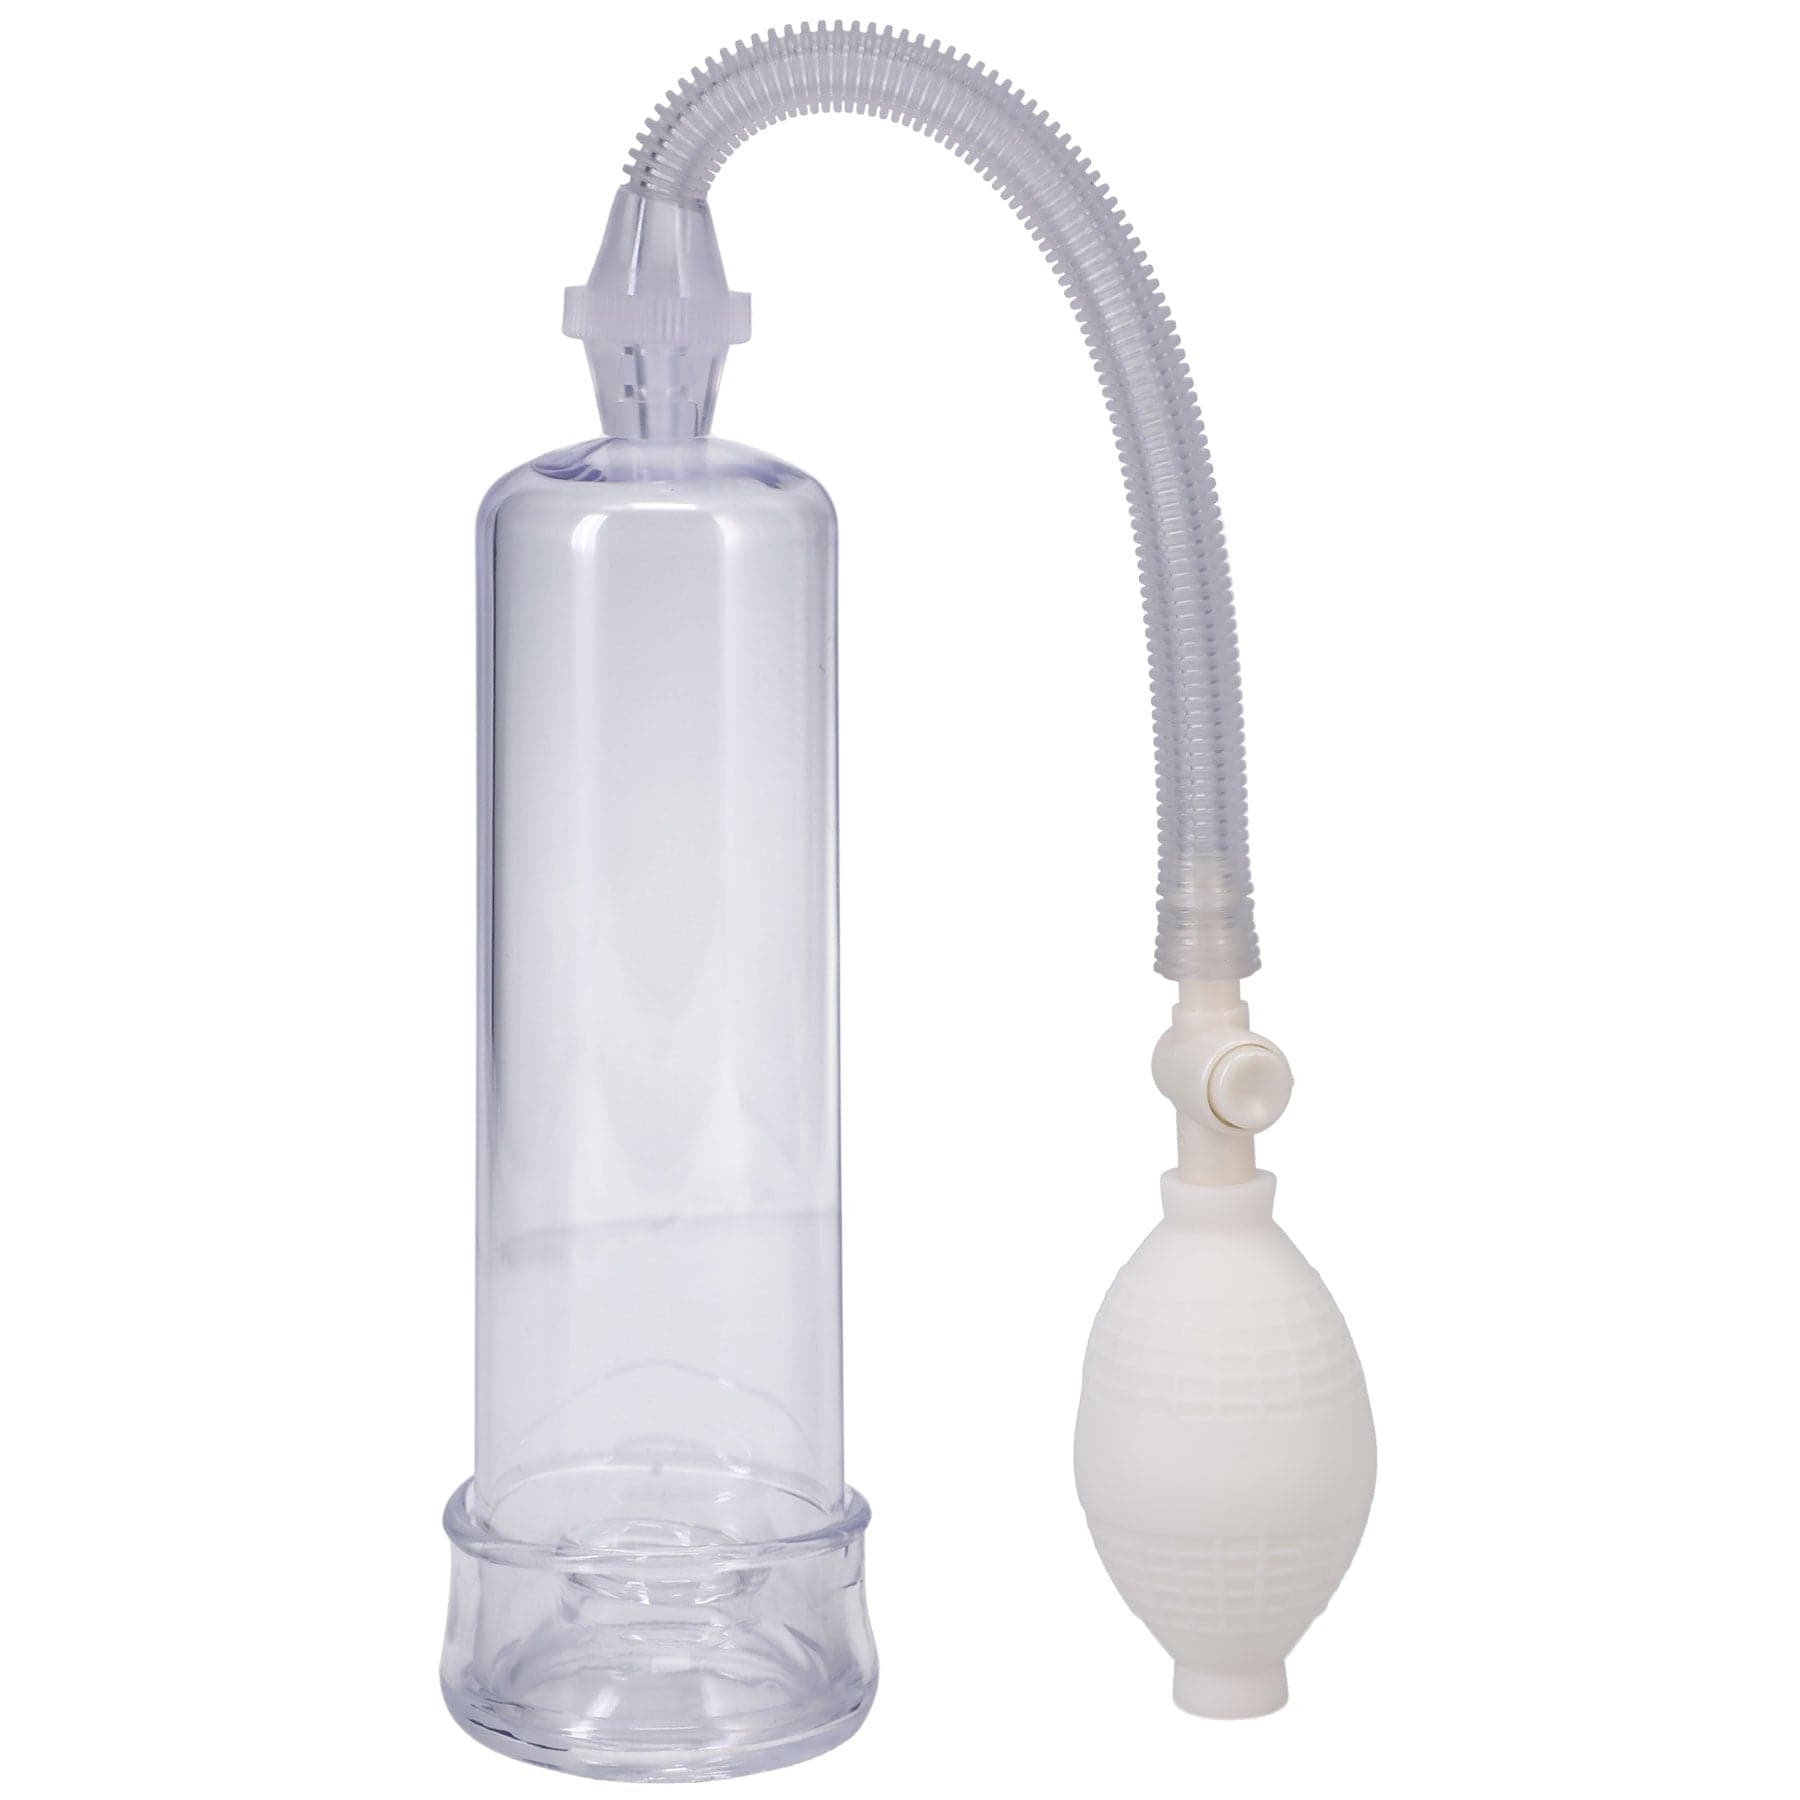 penis pump in use, what is a penis pump for